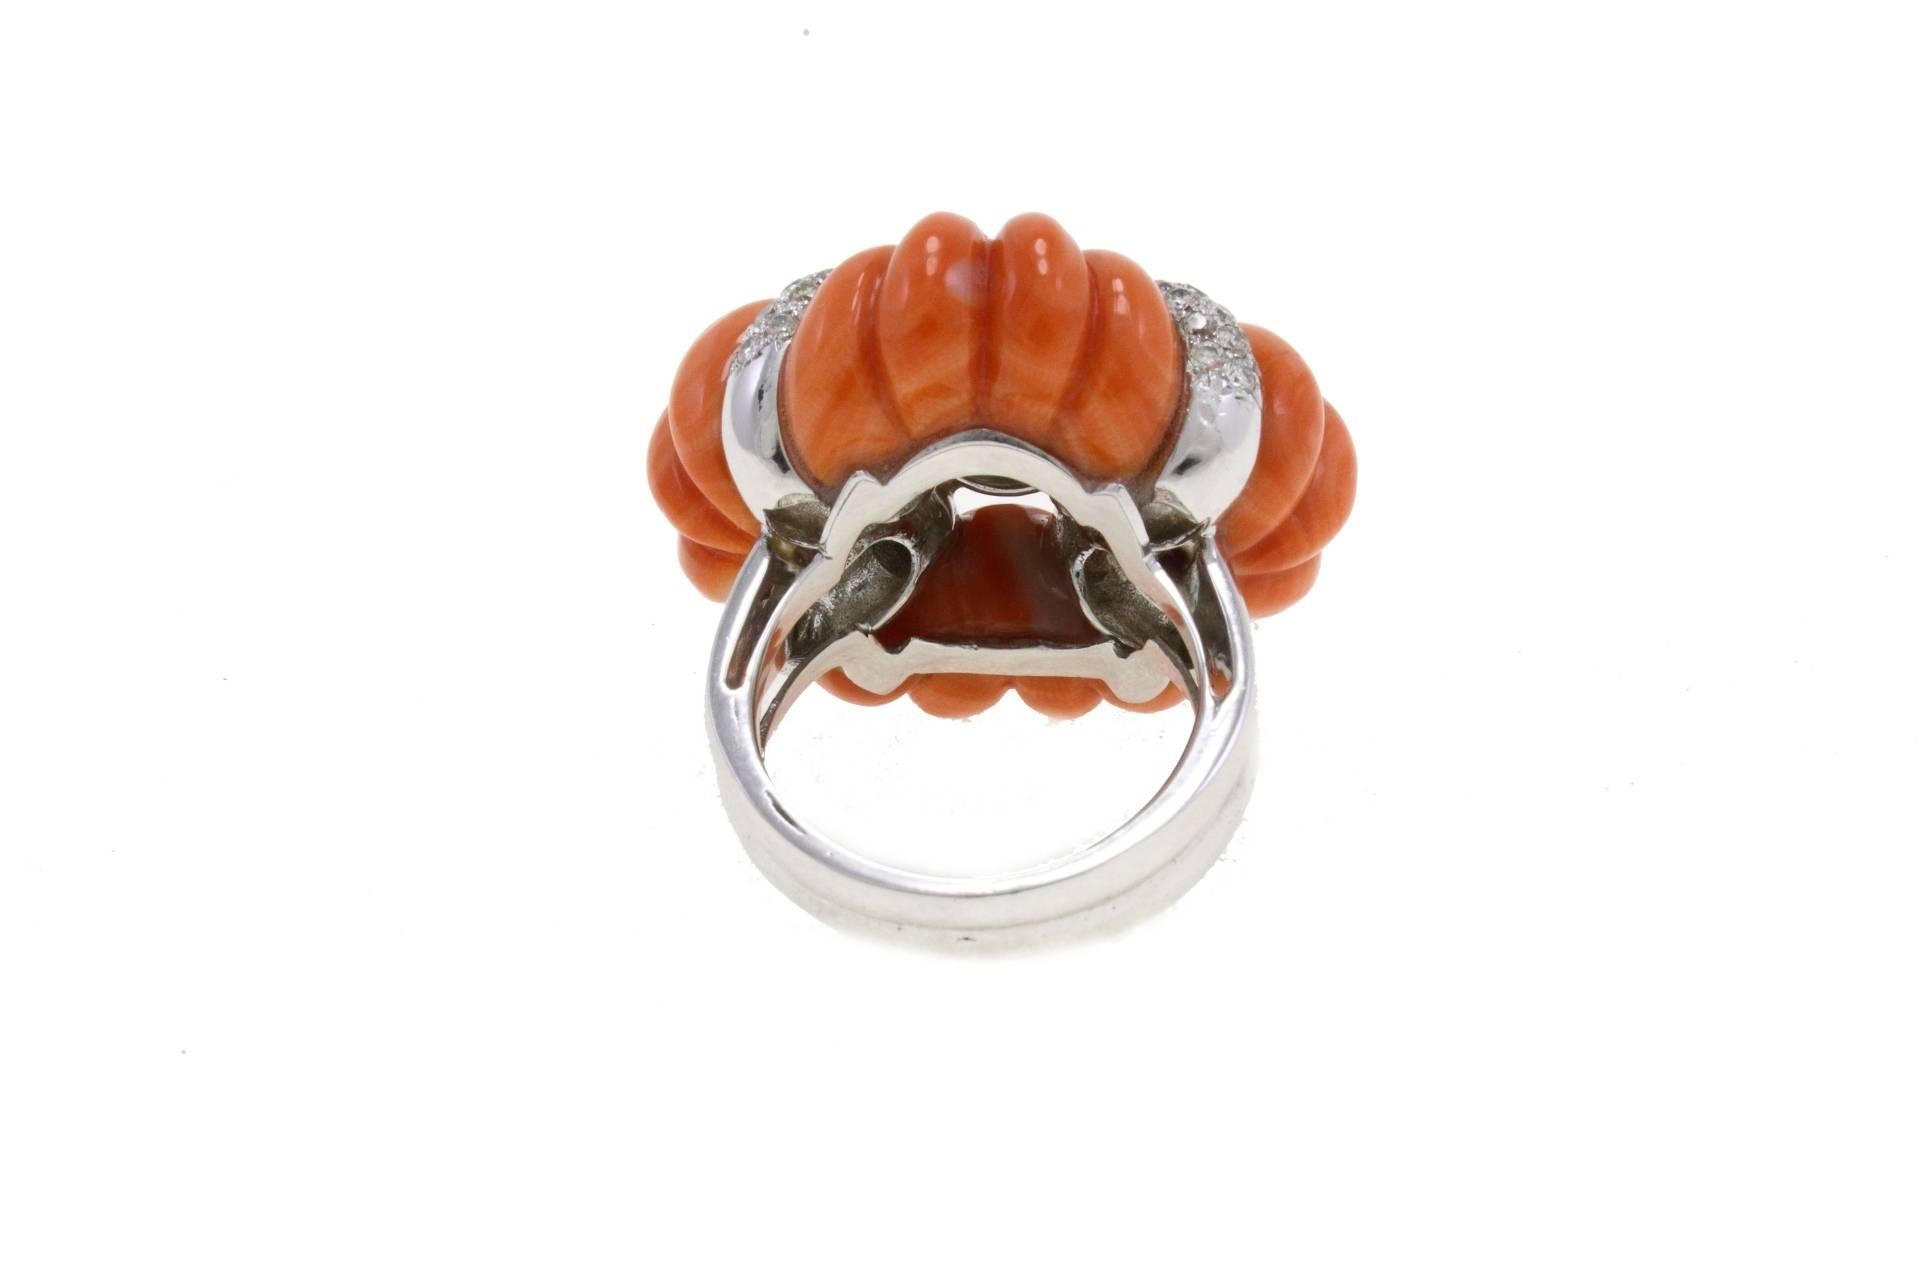 Cinderella pumpkin ring in 14kt white ring composed of coral and rows of diamonds with a diamond central ball.

diamonds 2.99kt
coral 8.40gr
tot weight 14gr
US Size
Width 1.18 inches
Lenght 1.26 inches
Higth 0.63 inches
ref.rhor